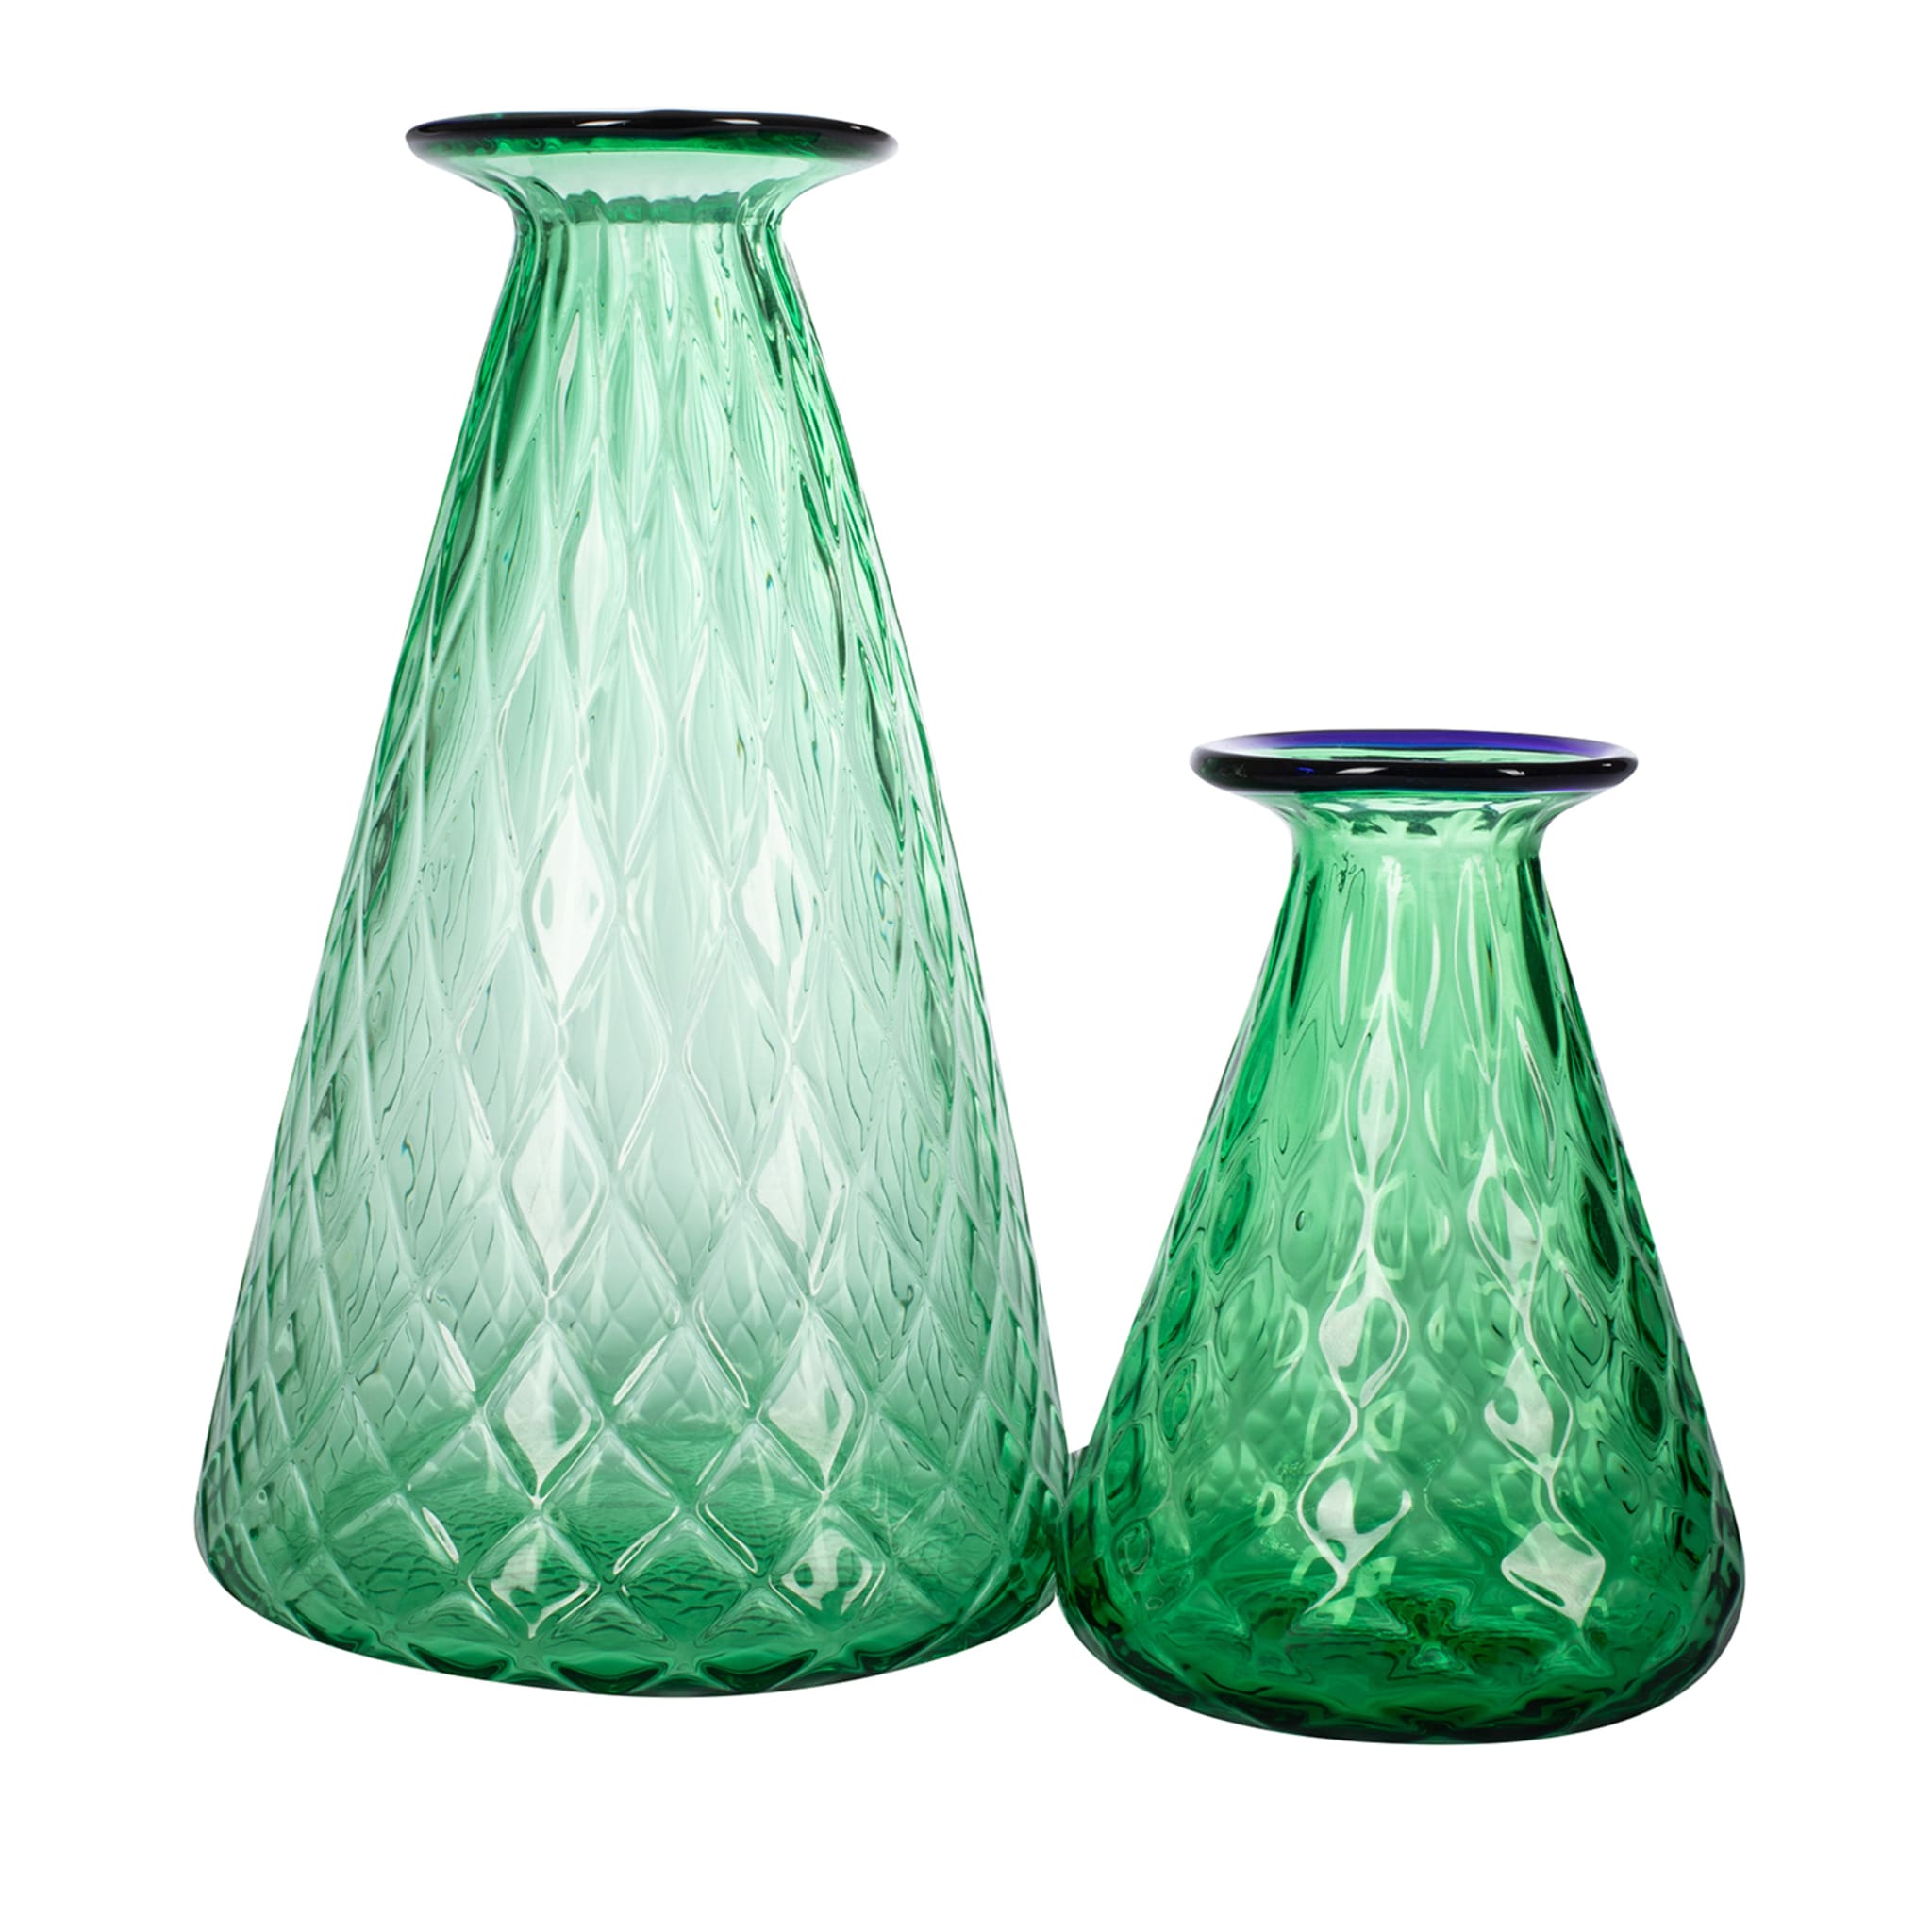 Balloton Set of 2 Conical Green Vases - Main view